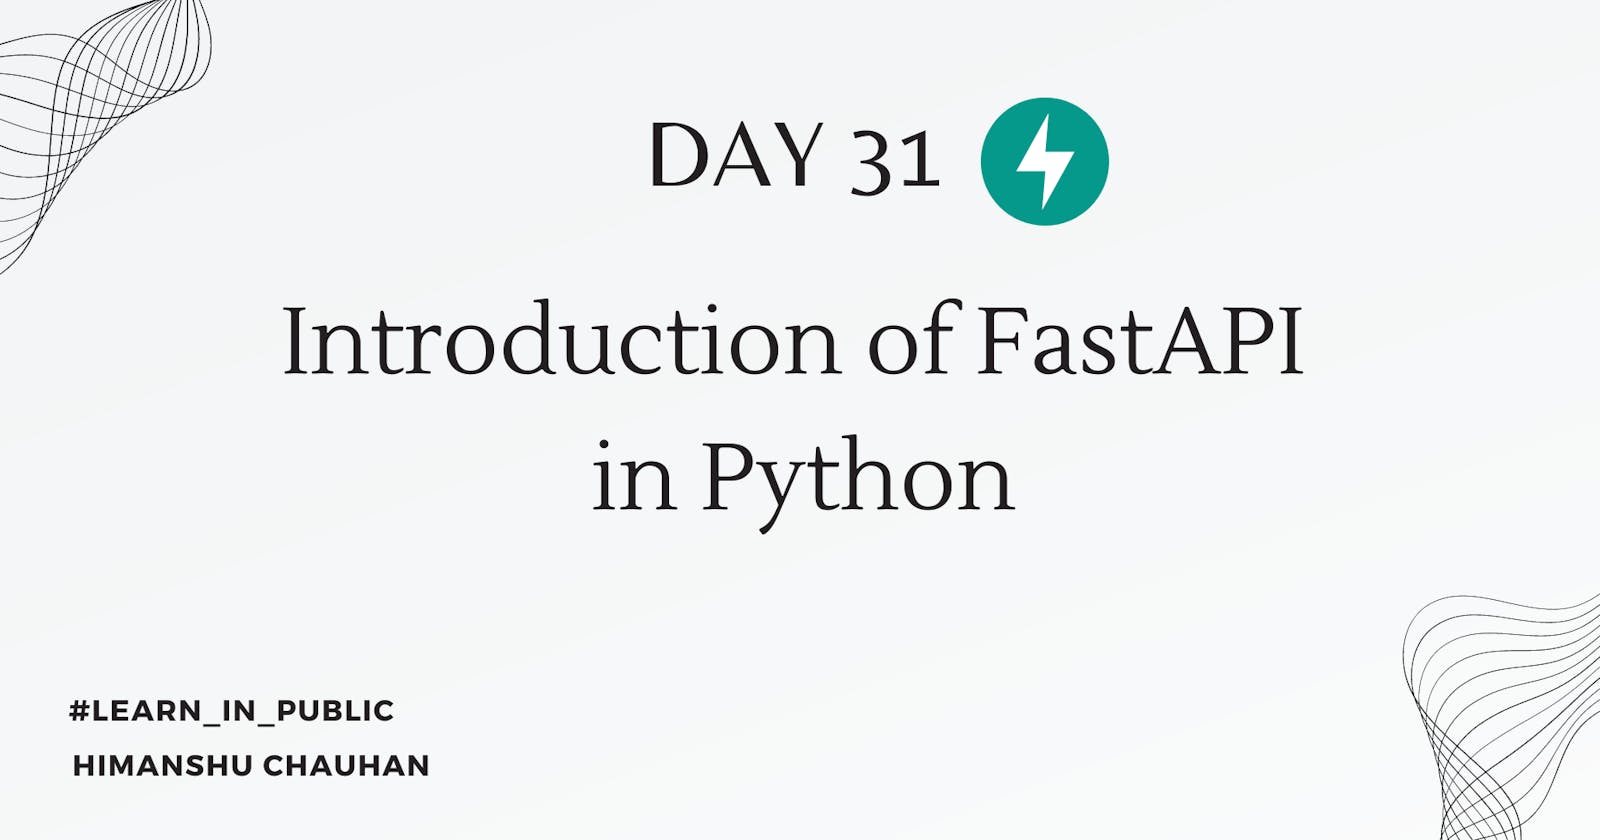 Day 31: Introduction of FastAPI